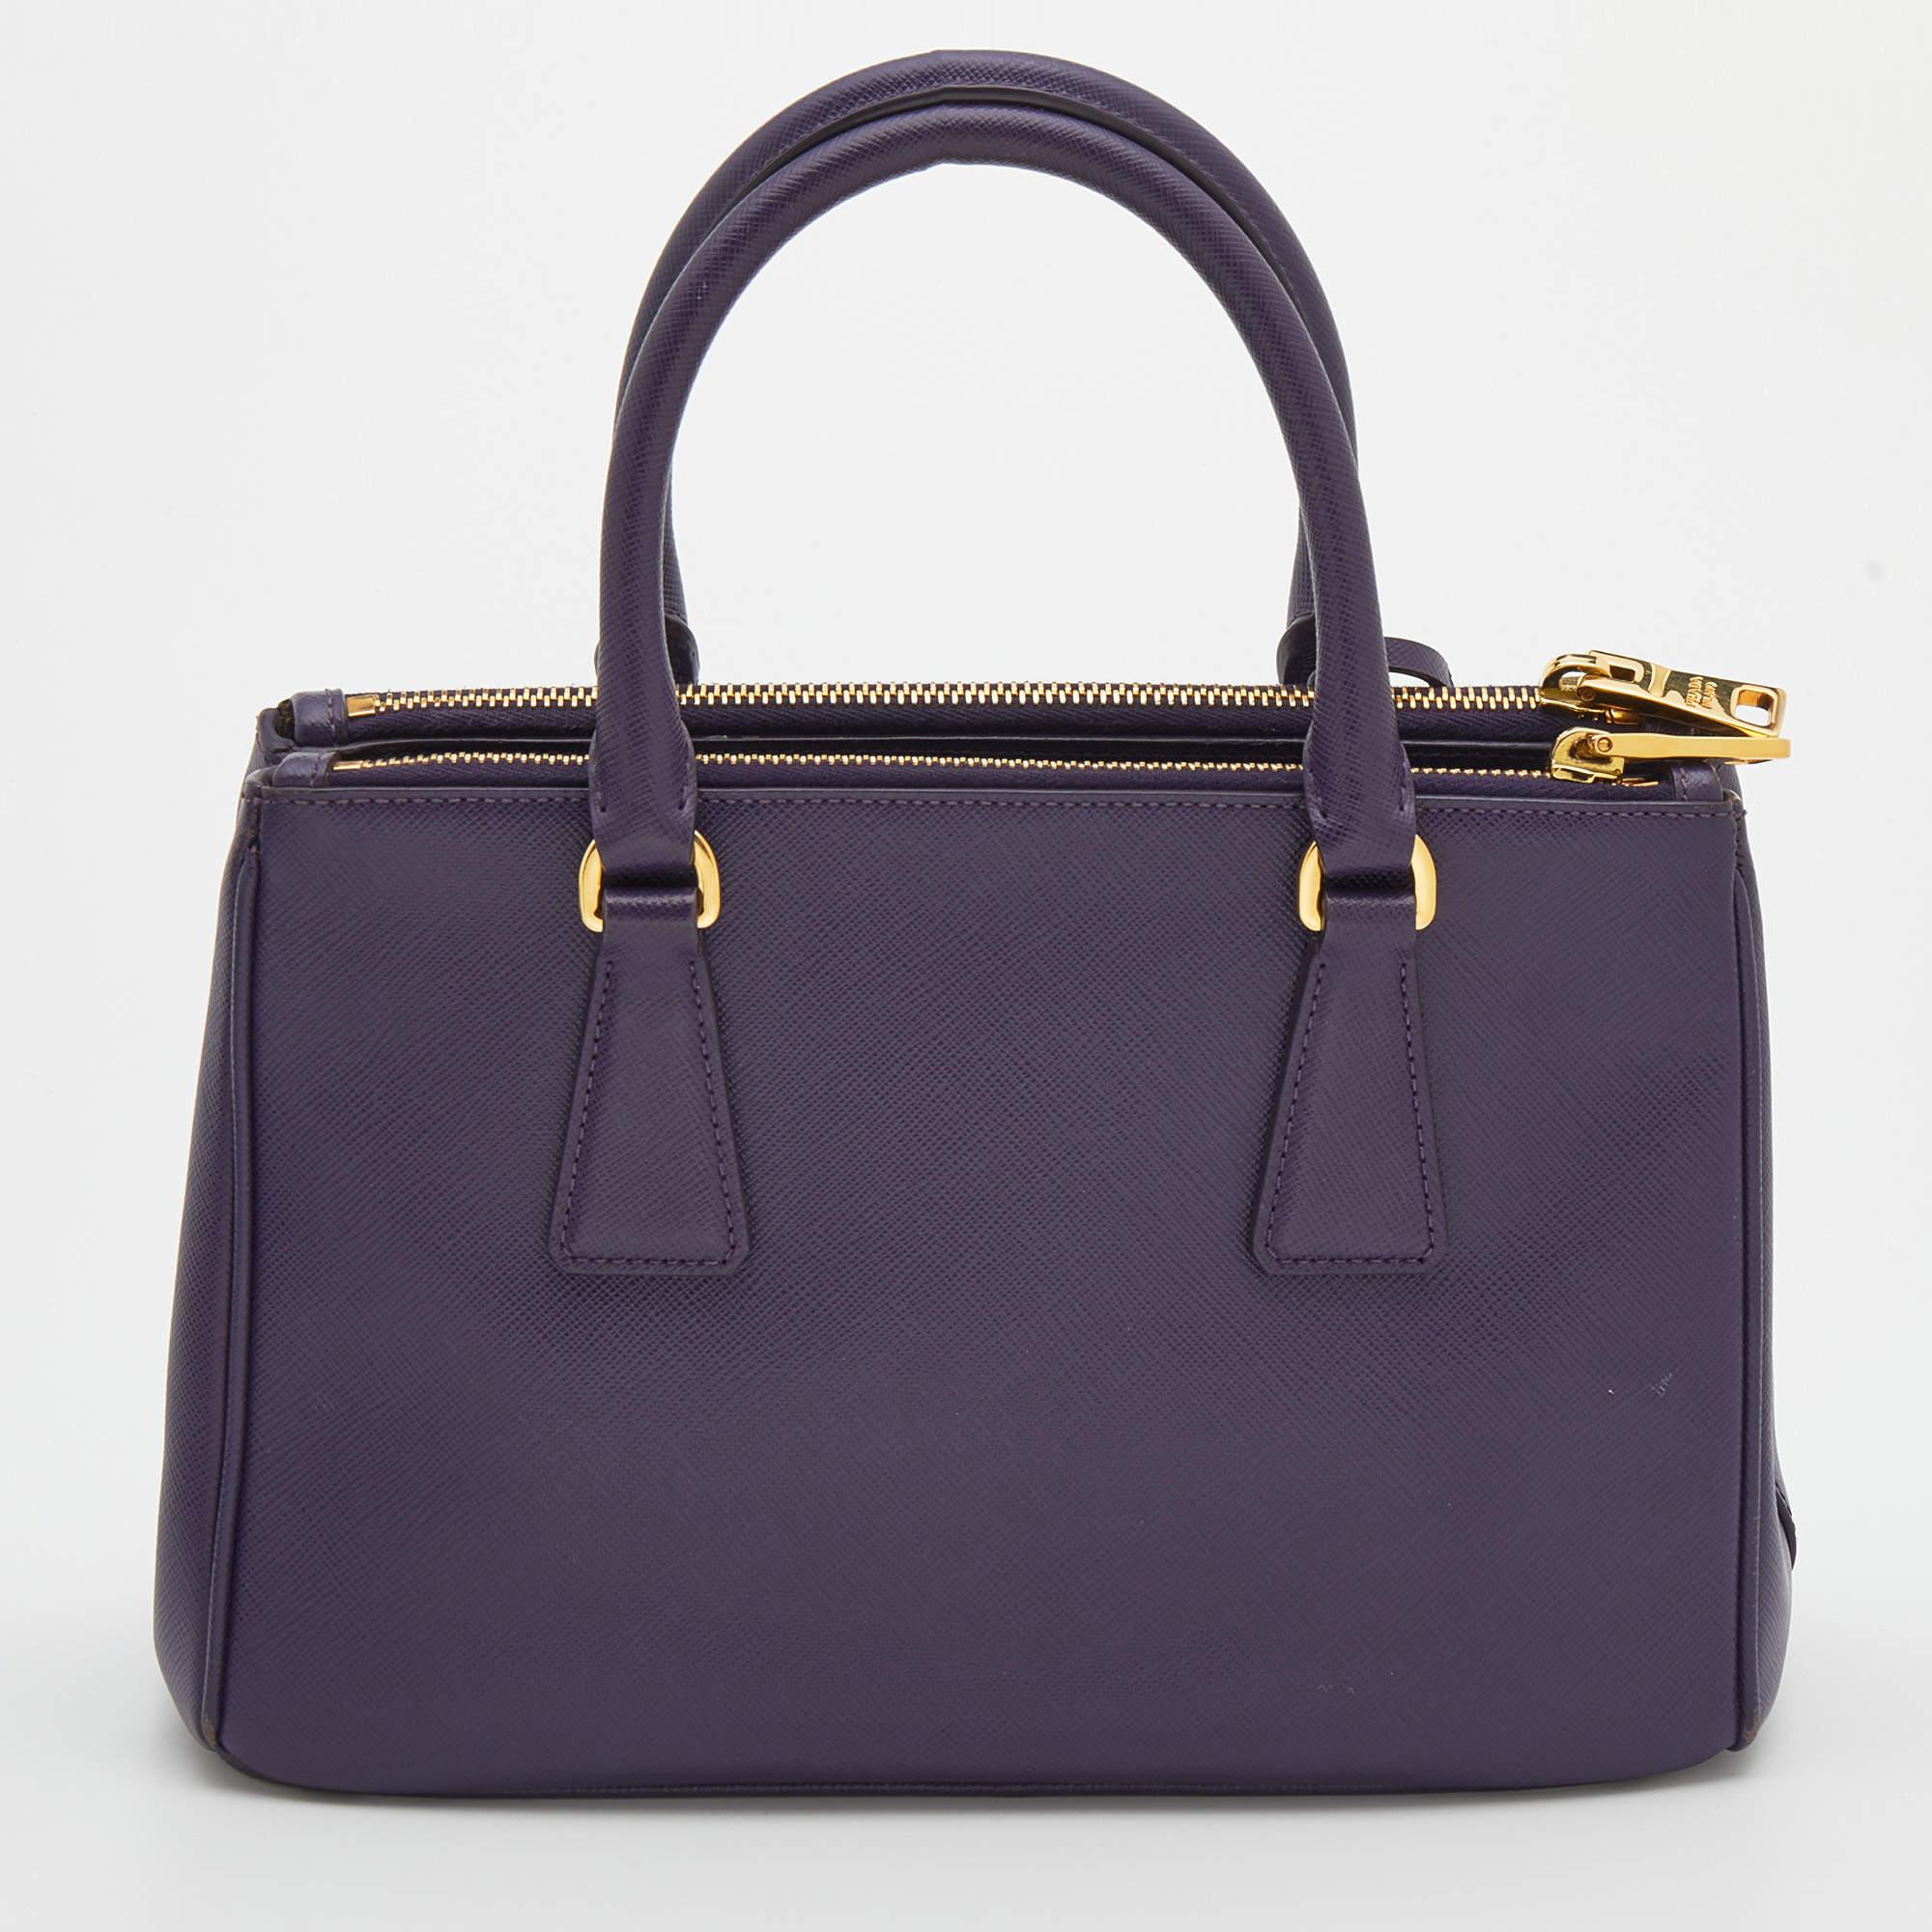 Loved for its classic appeal and functional design, Galleria is one of the most iconic bags from the house of Prada. This beauty in purple is crafted from Saffiano leather and is equipped with two top handles, the brand logo at the front, and a